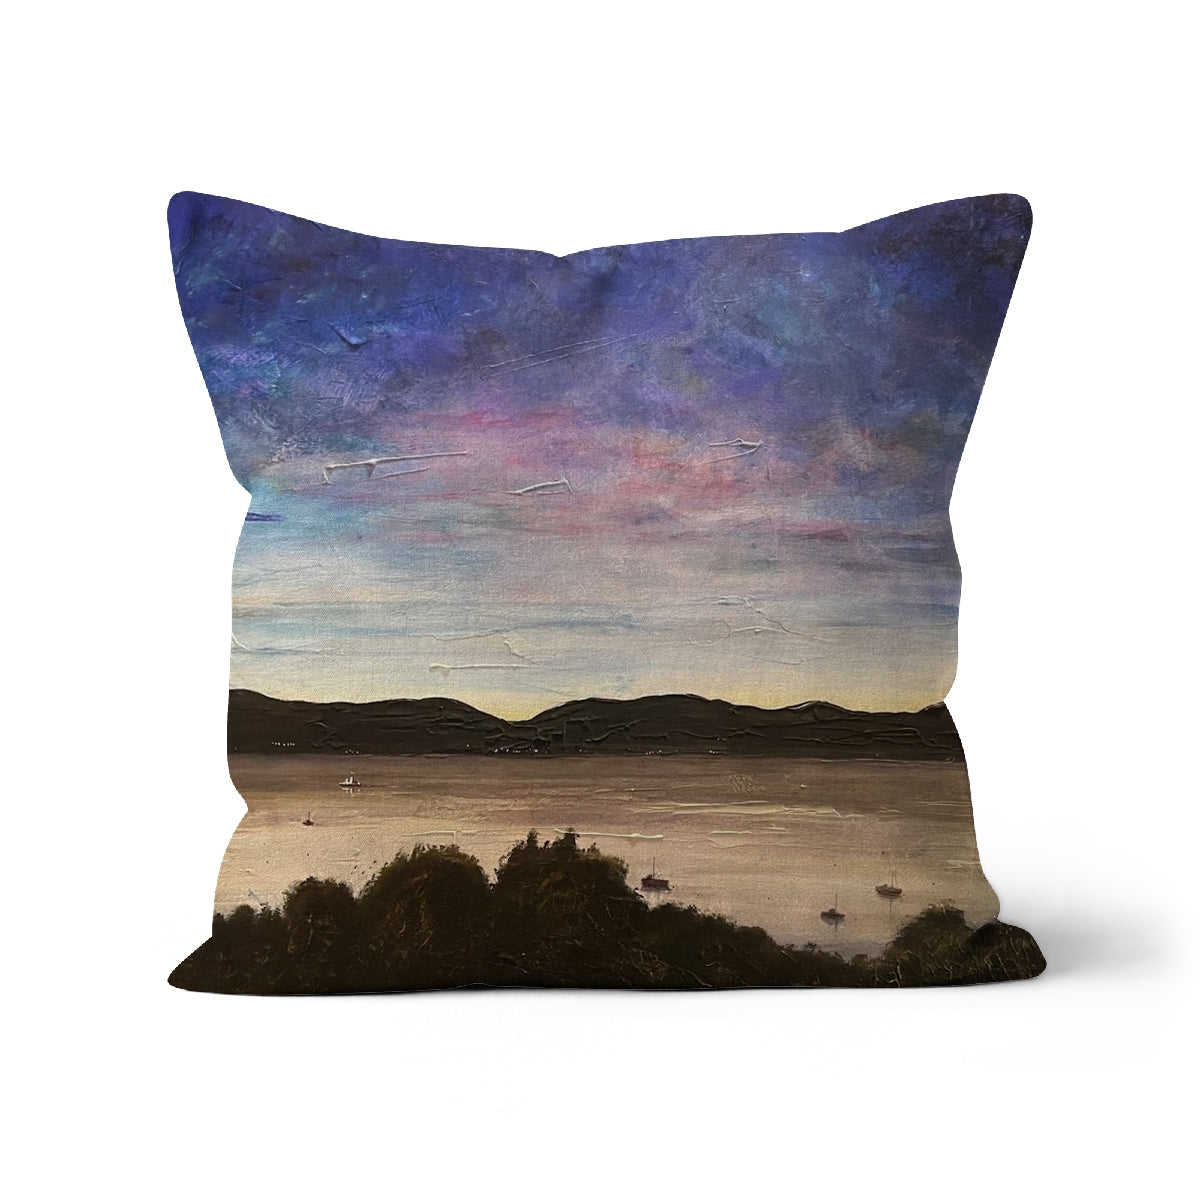 River Clyde Twilight Art Gifts Cushion-Cushions-River Clyde Art Gallery-Linen-12"x12"-Paintings, Prints, Homeware, Art Gifts From Scotland By Scottish Artist Kevin Hunter